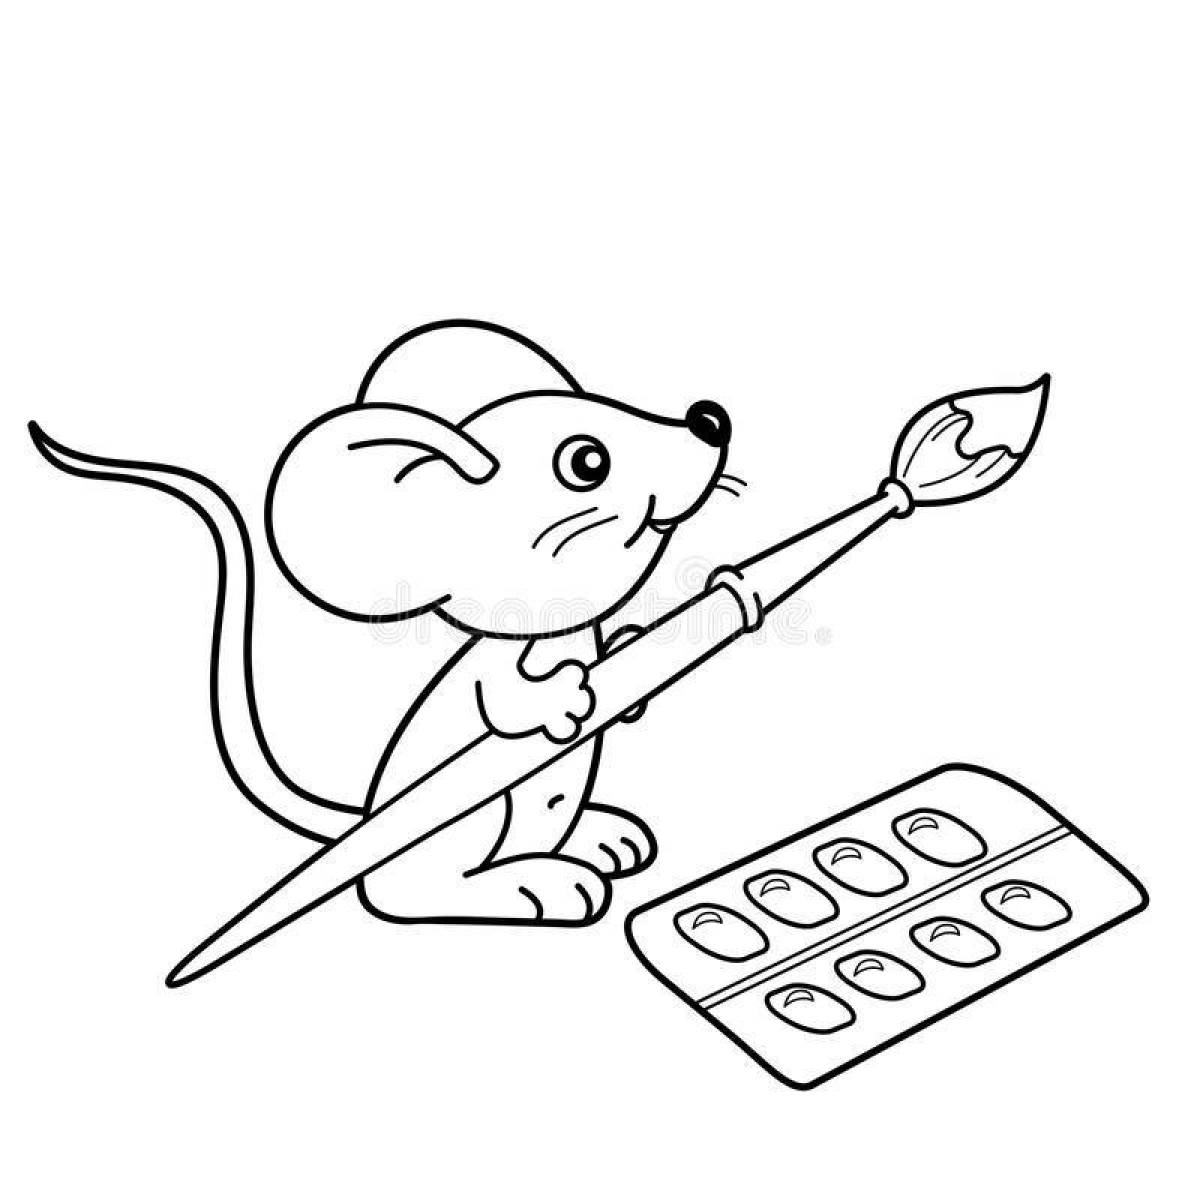 Colorful computer mouse coloring page